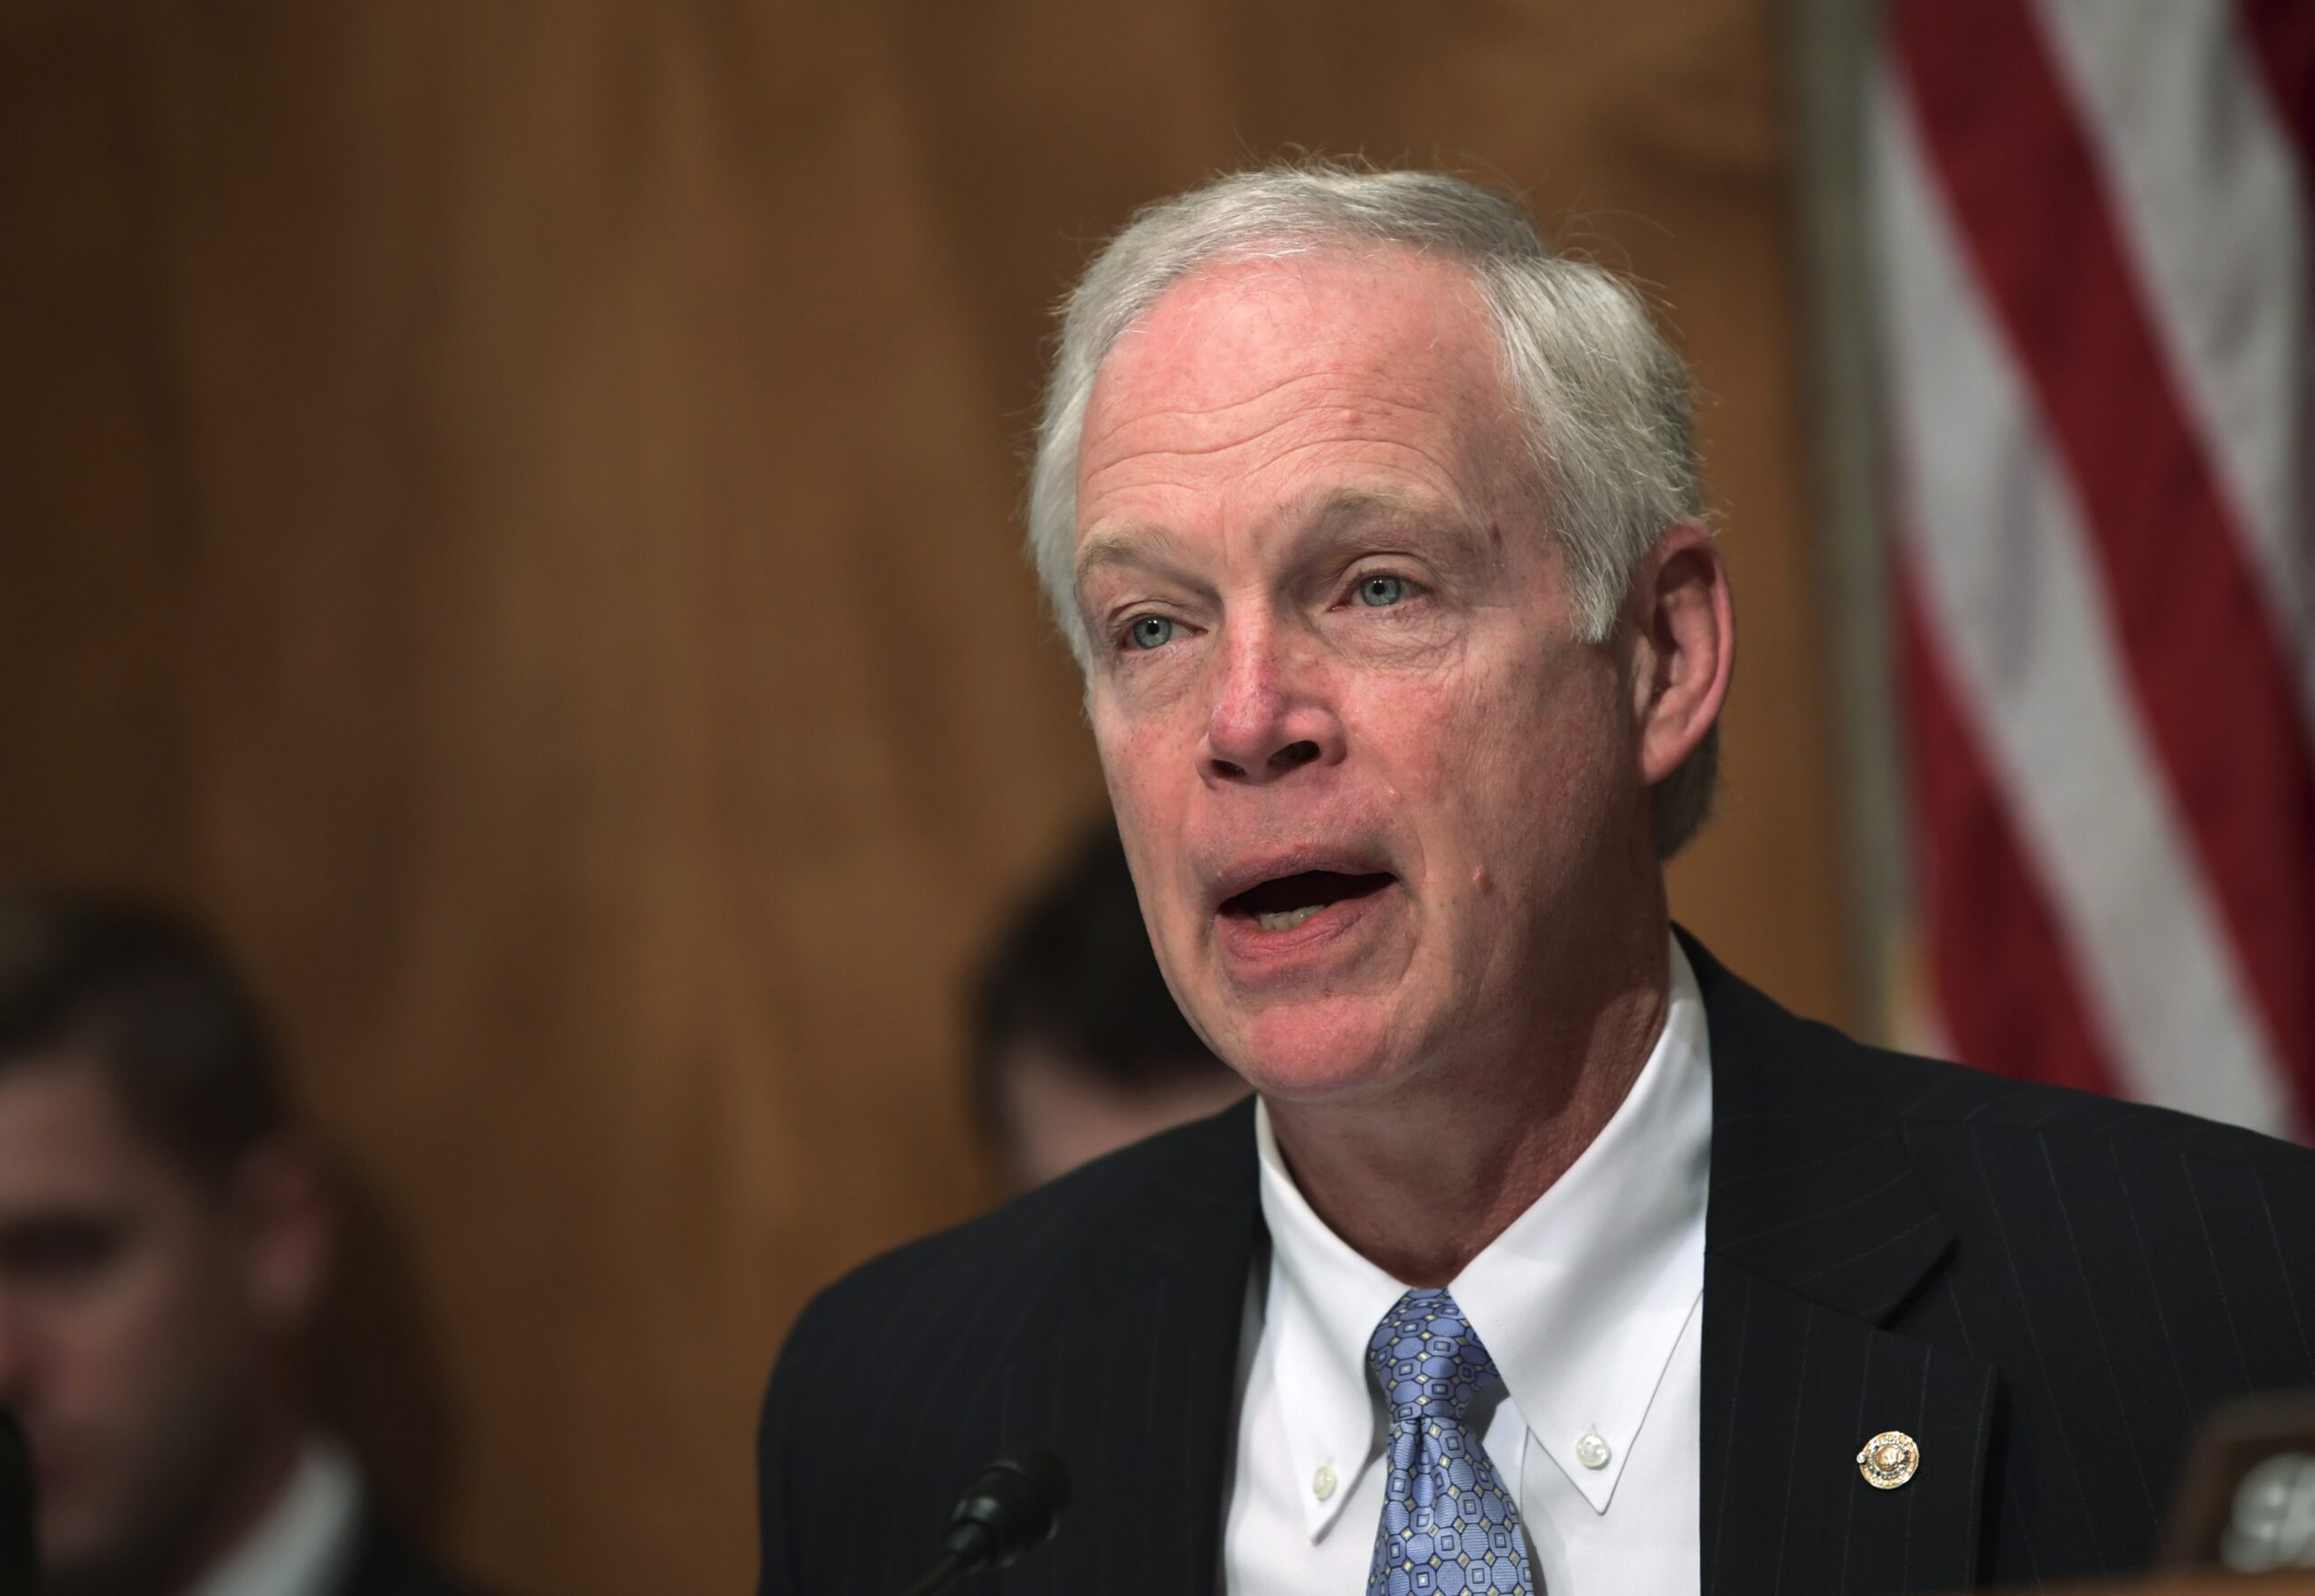 Ron Johnson joins Republicans in calling for Justice Protasiewicz to step down from certain cases